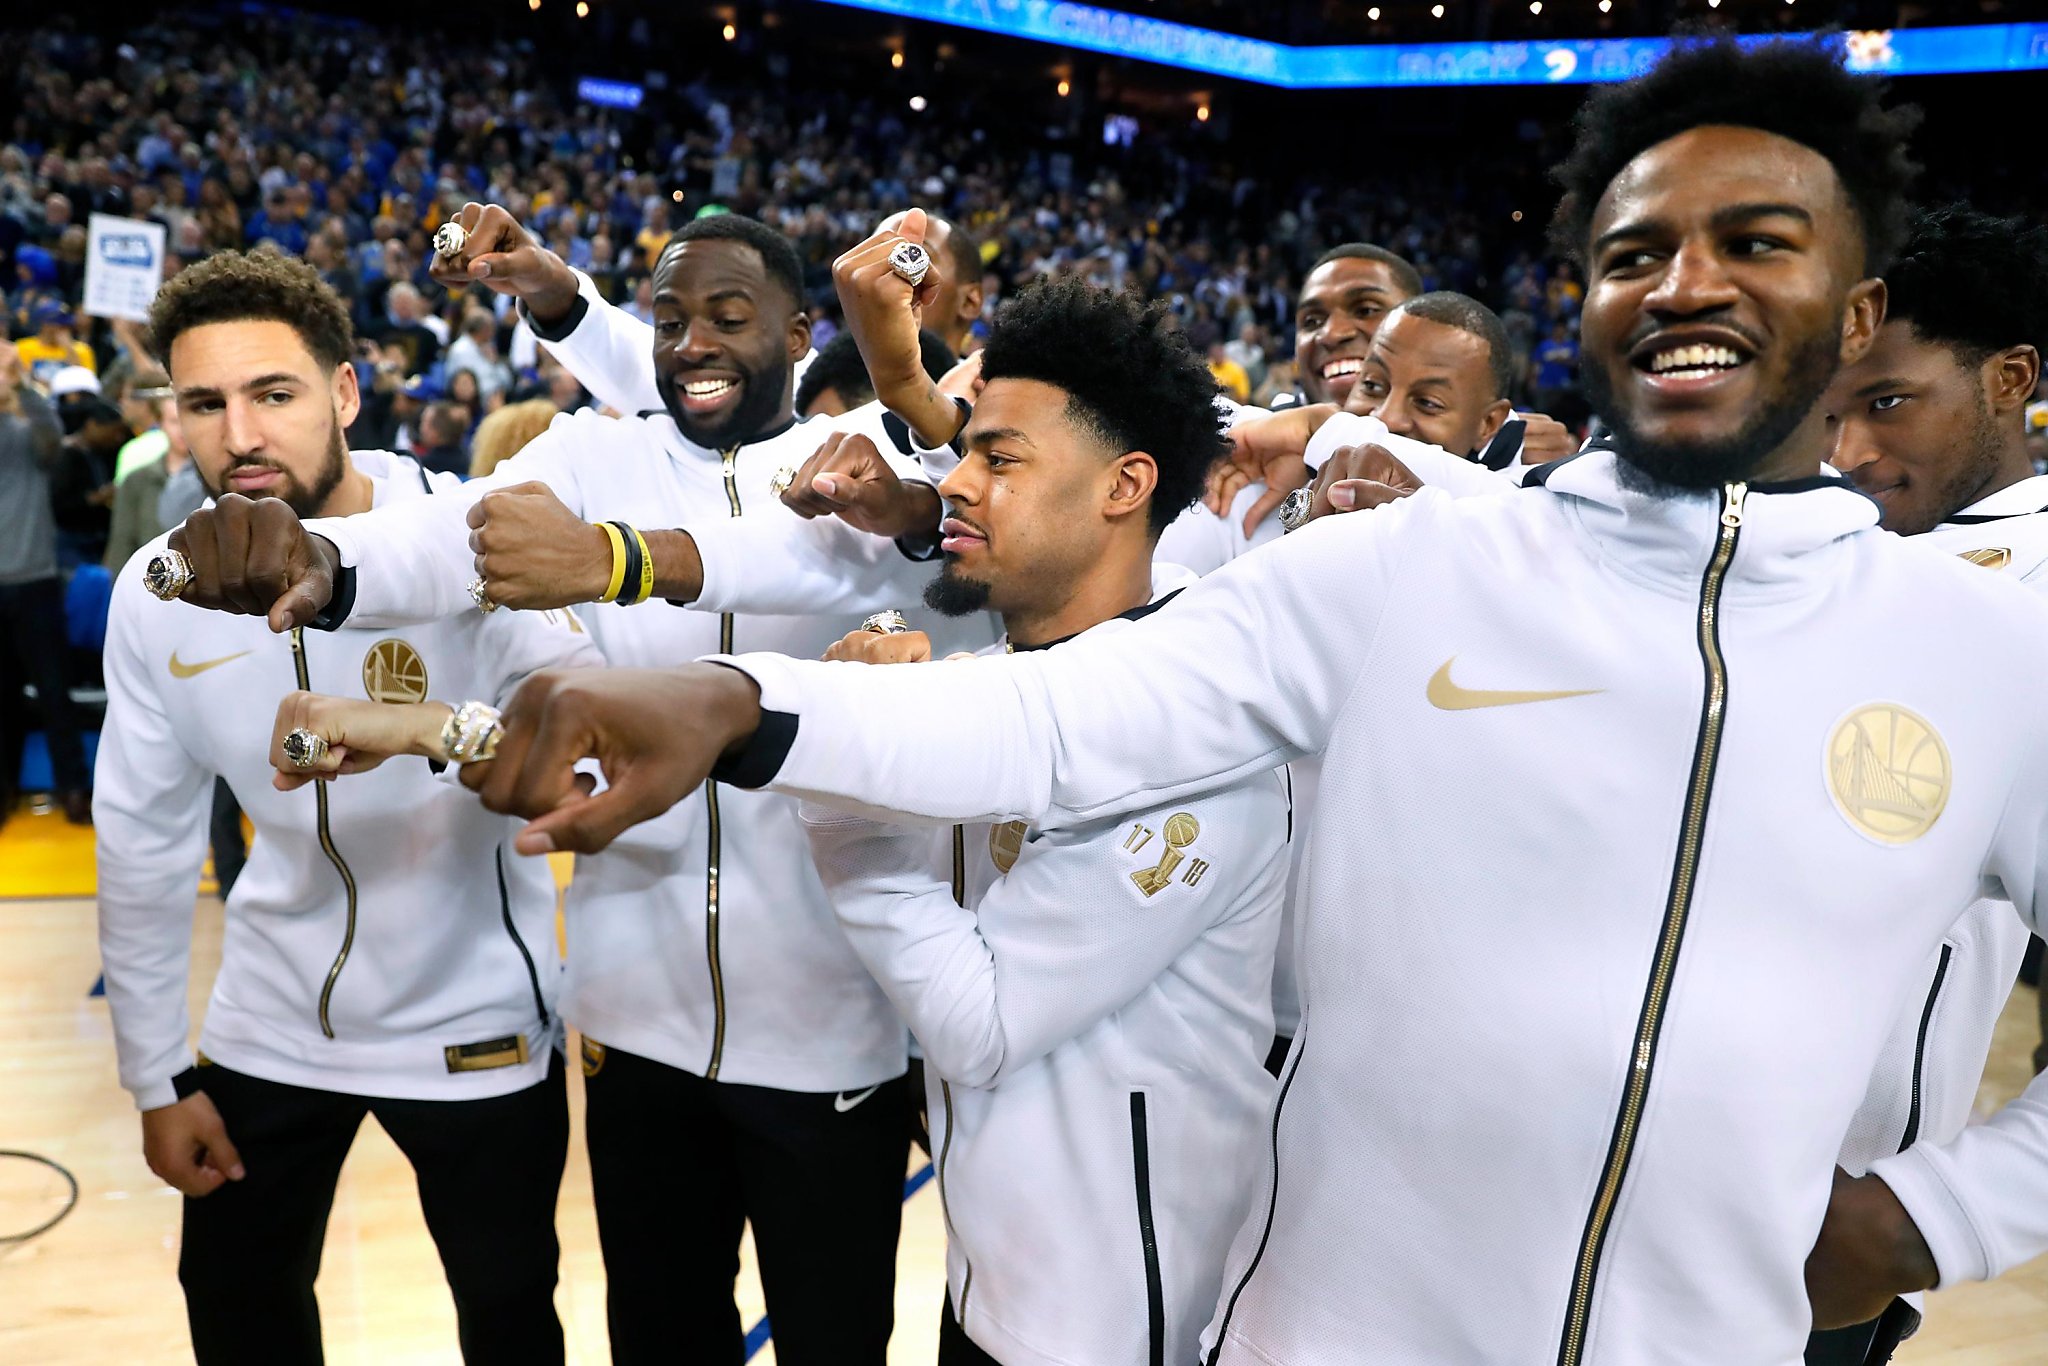 Warriors named Sports Illustrated “Sportsperson of the Year”